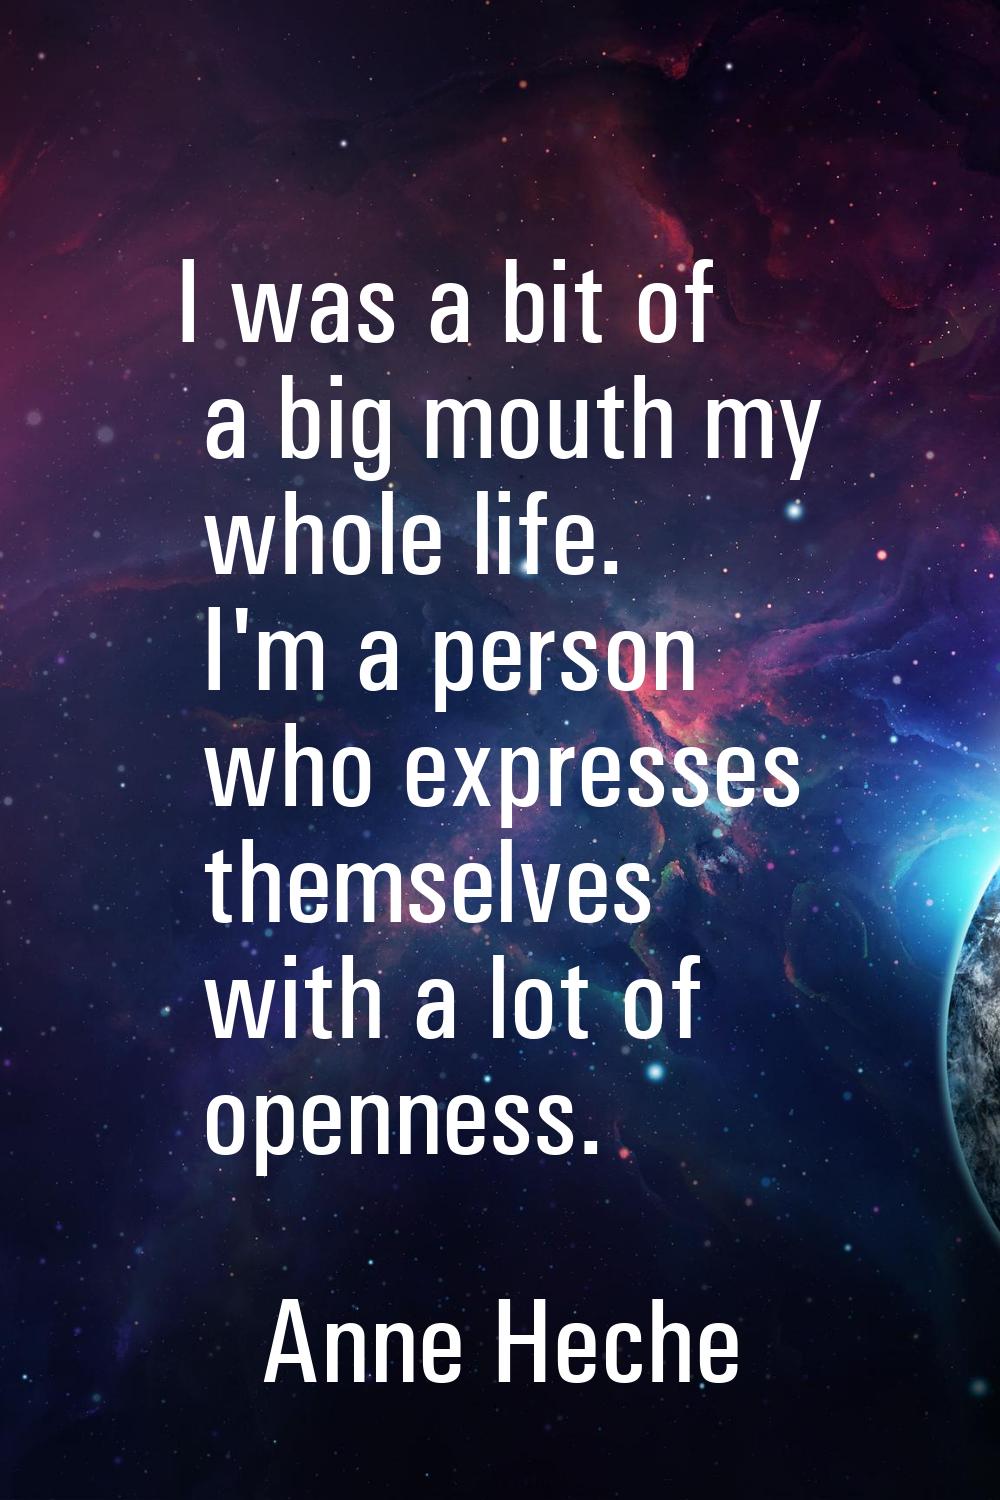 I was a bit of a big mouth my whole life. I'm a person who expresses themselves with a lot of openn